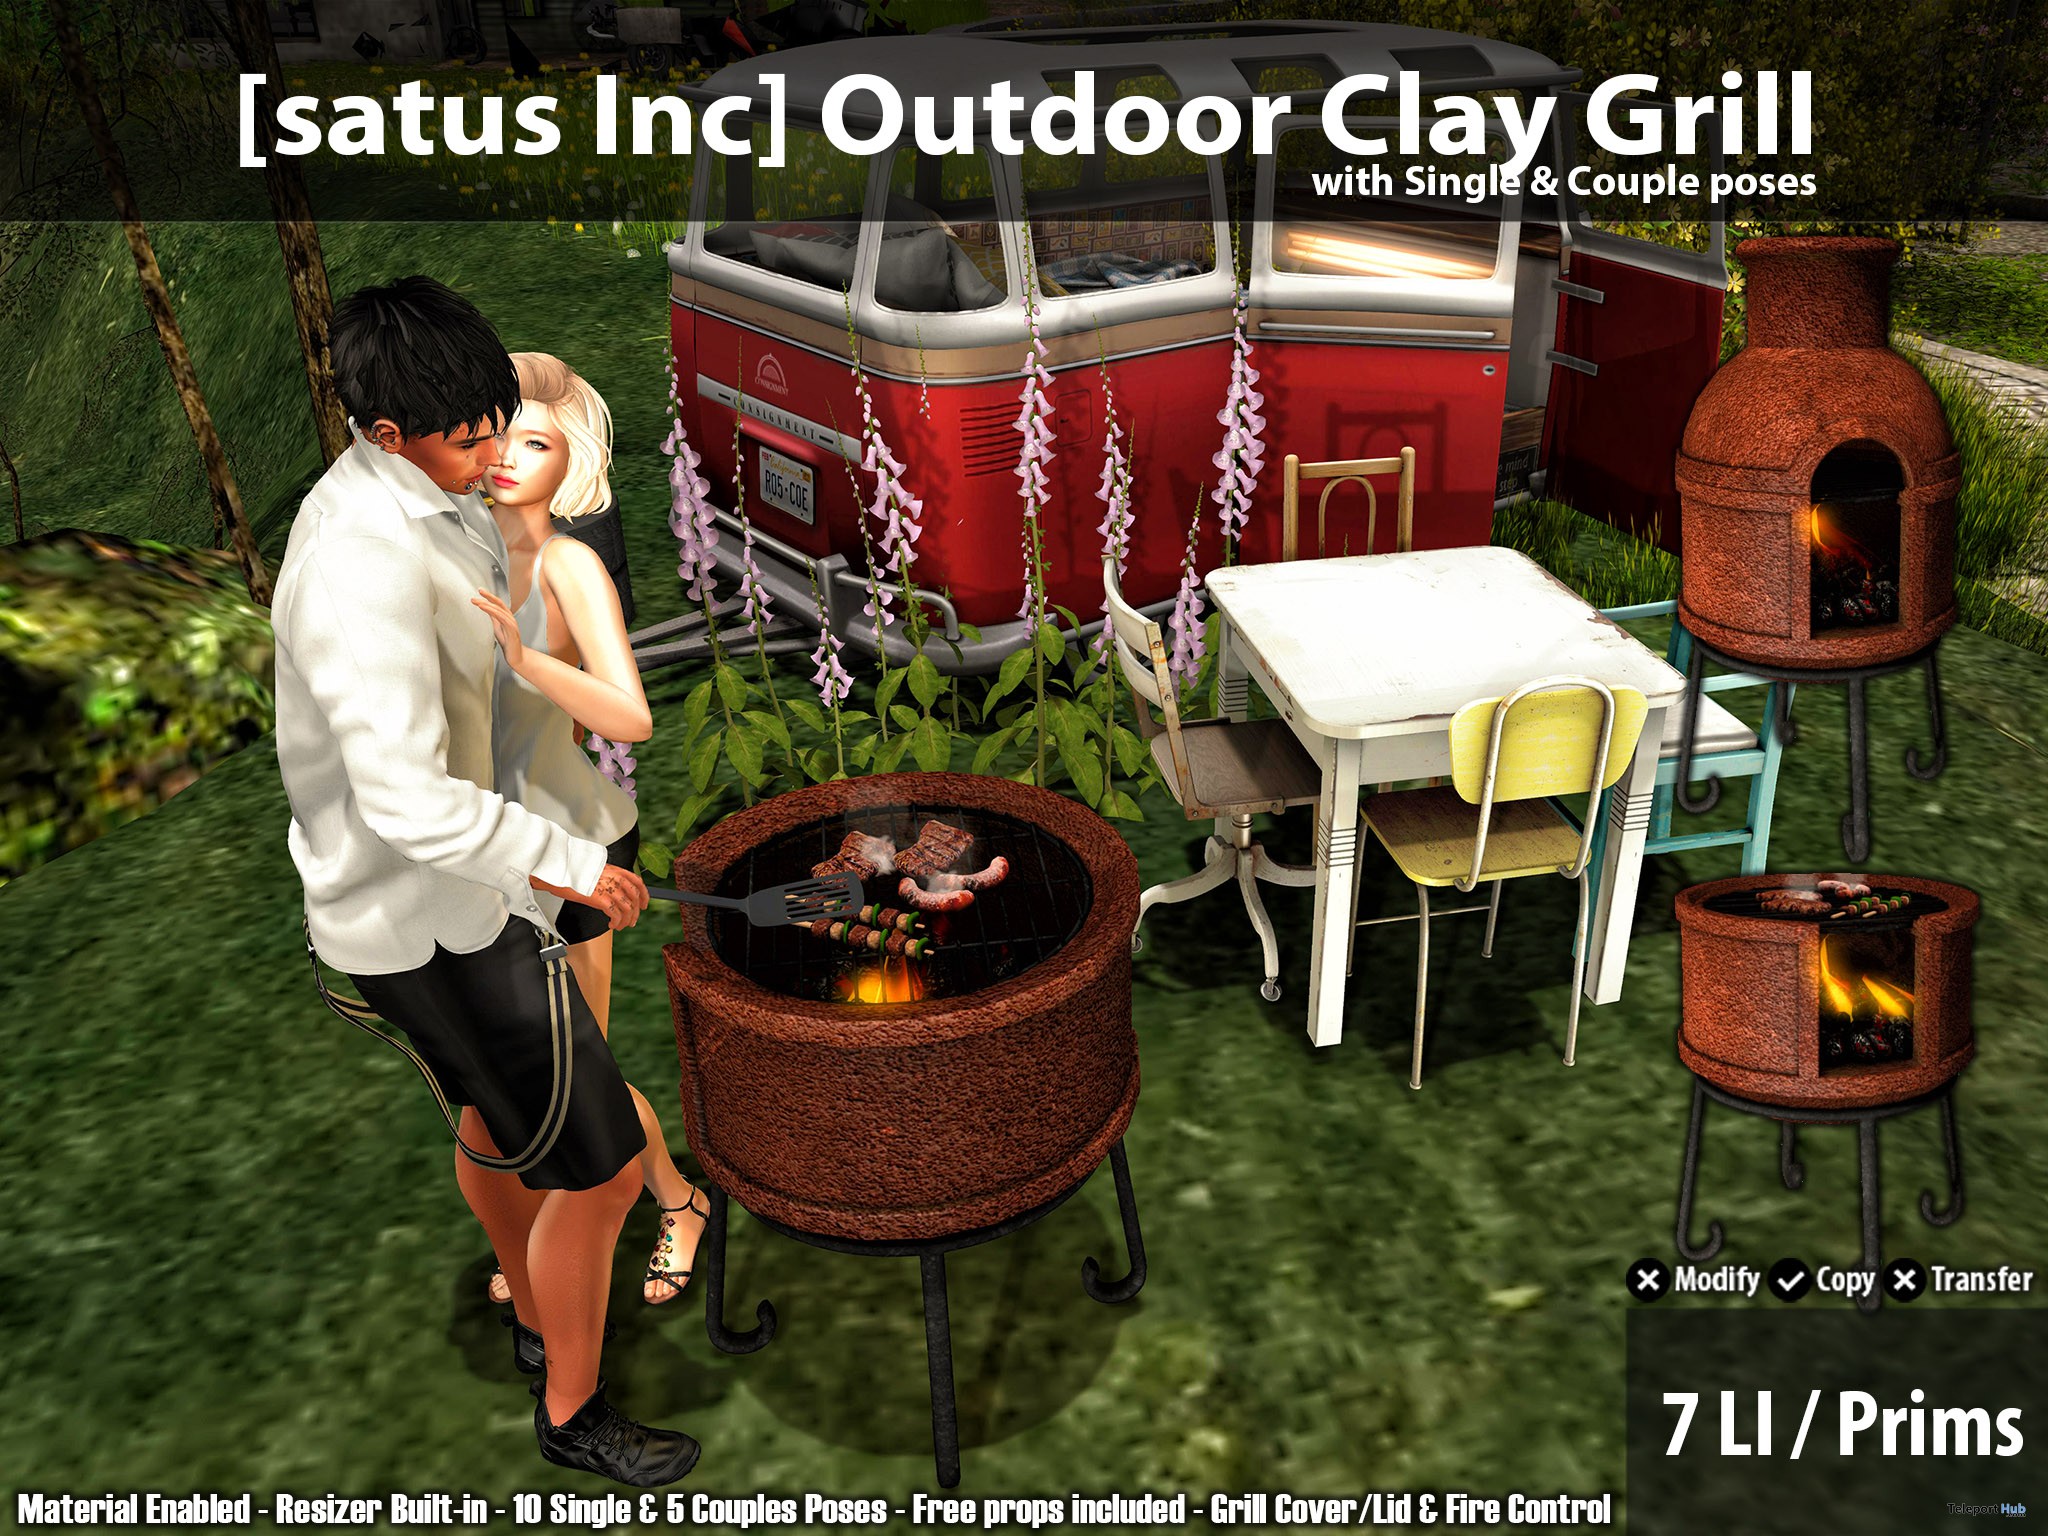 New Release: Outdoor Clay Grill by [satus Inc] - Teleport Hub - teleporthub.com